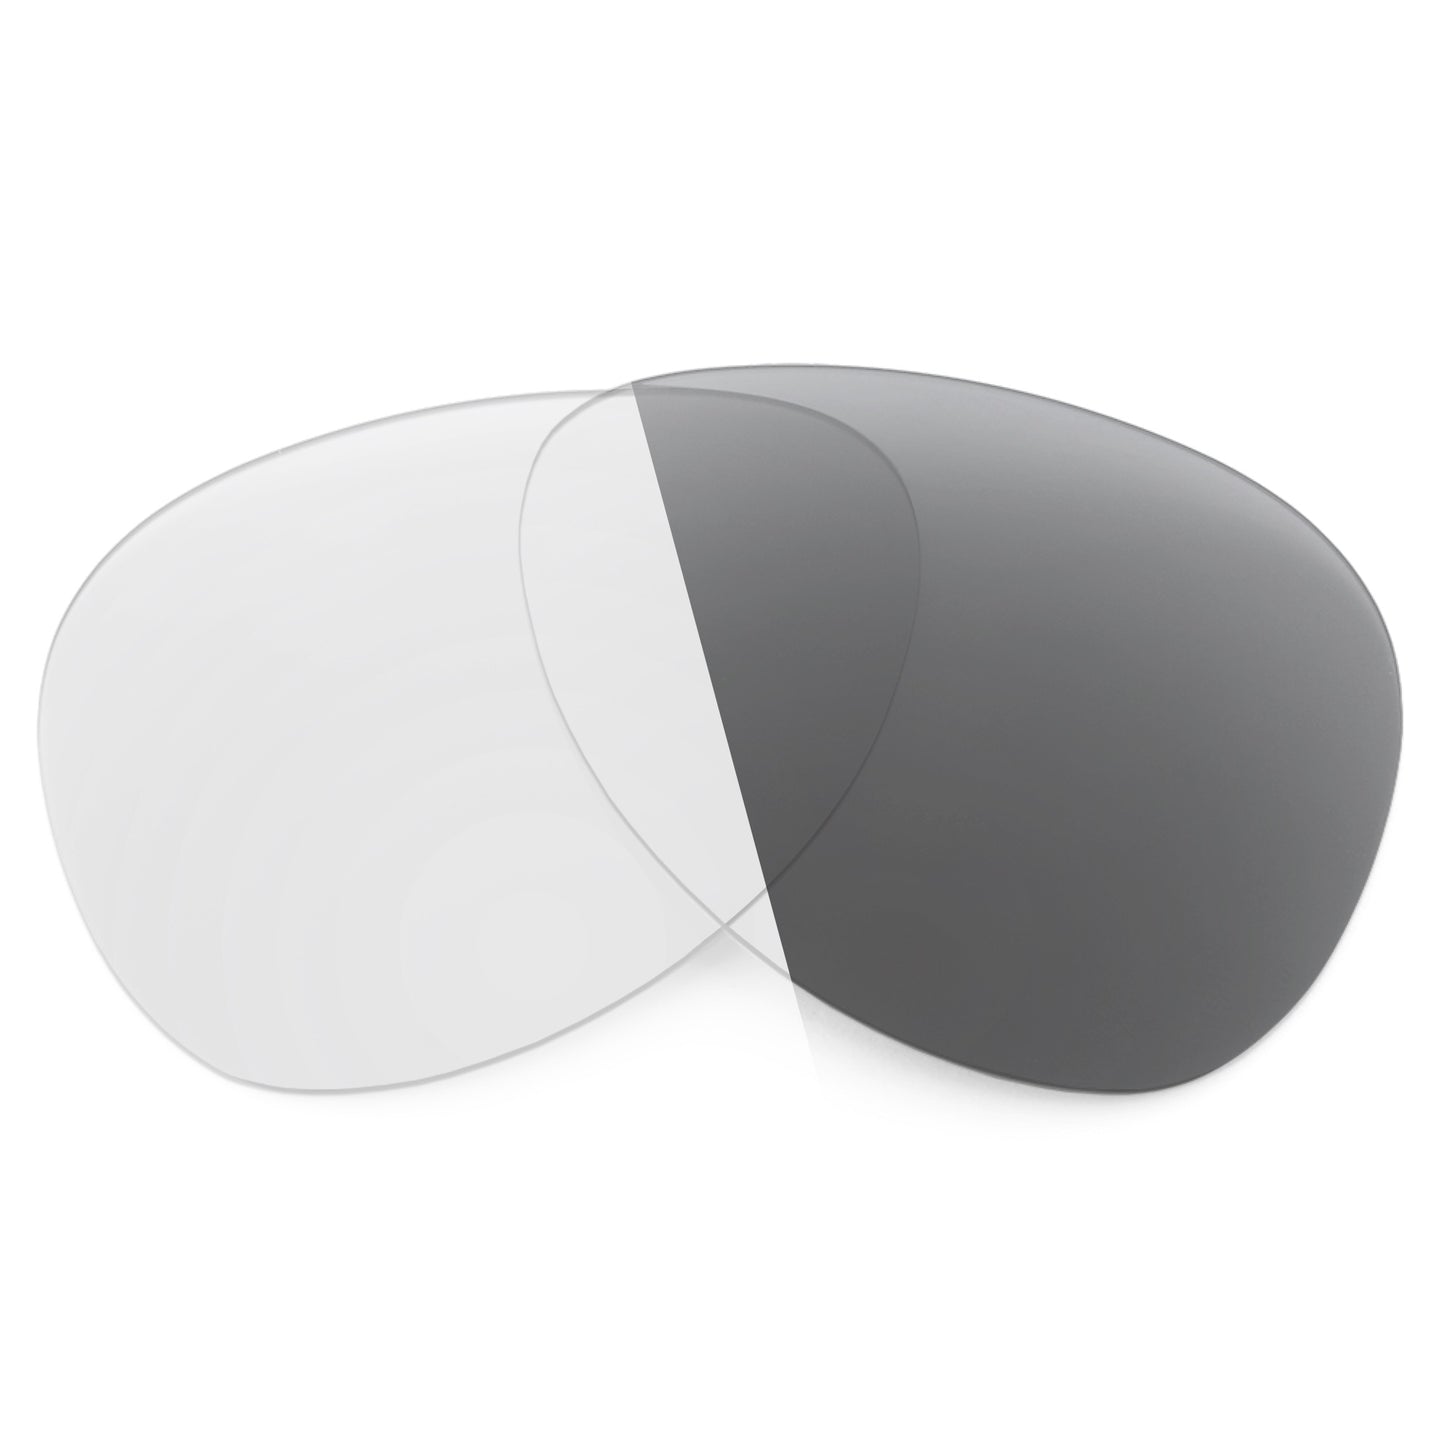 Revant replacement lenses for Ray-Ban RB3523 59mm Non-Polarized Adapt Gray Photochromic